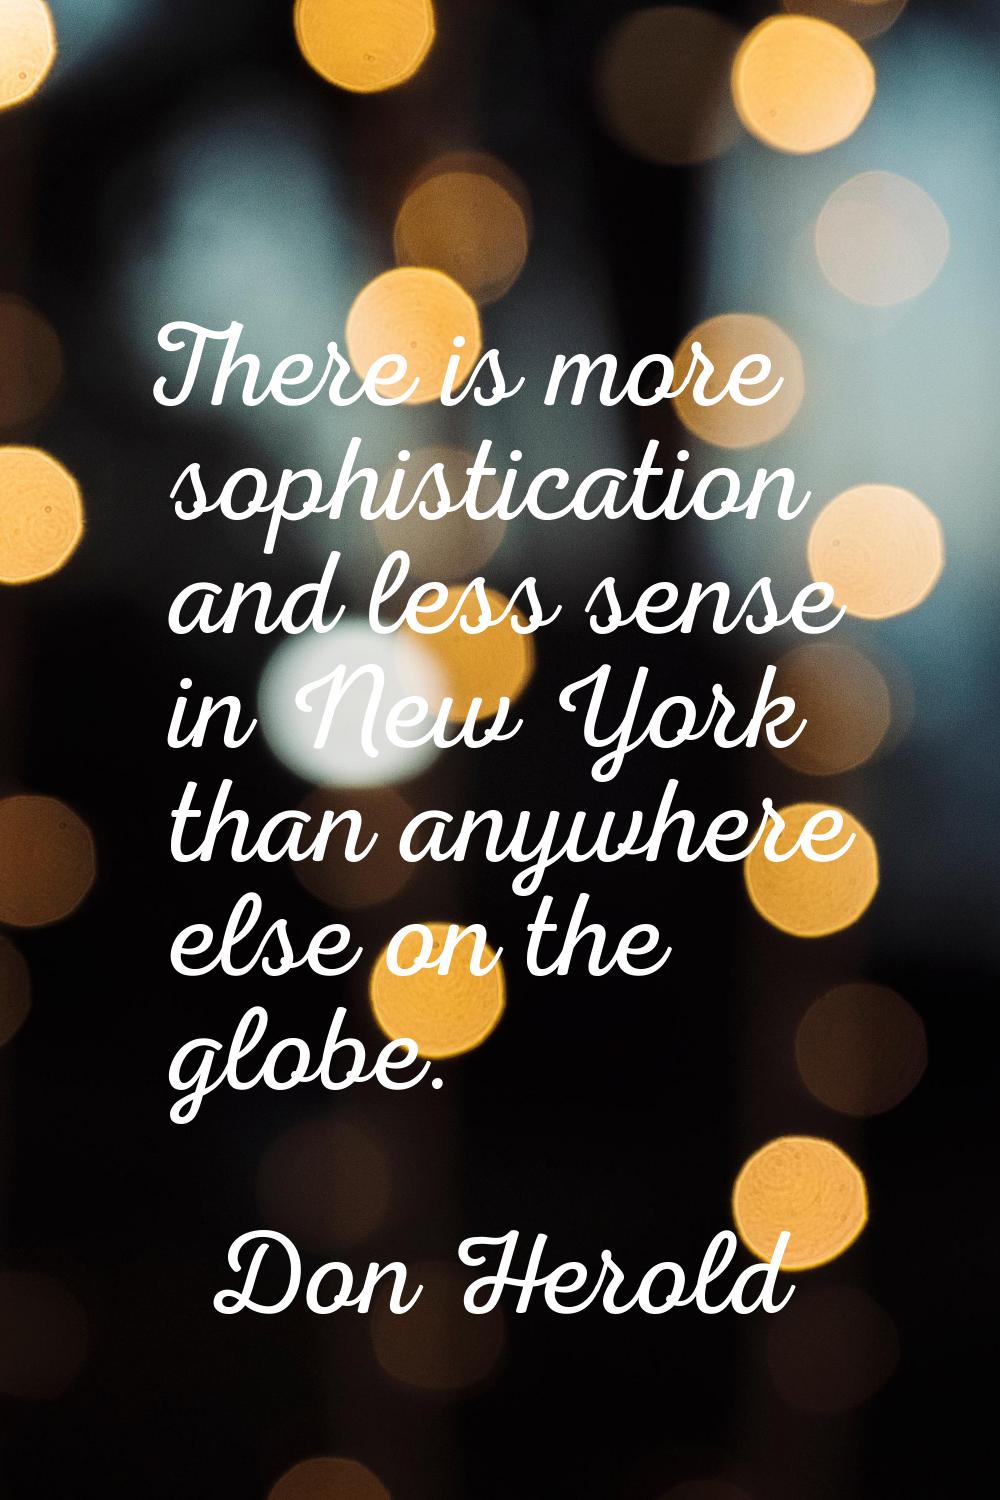 There is more sophistication and less sense in New York than anywhere else on the globe.